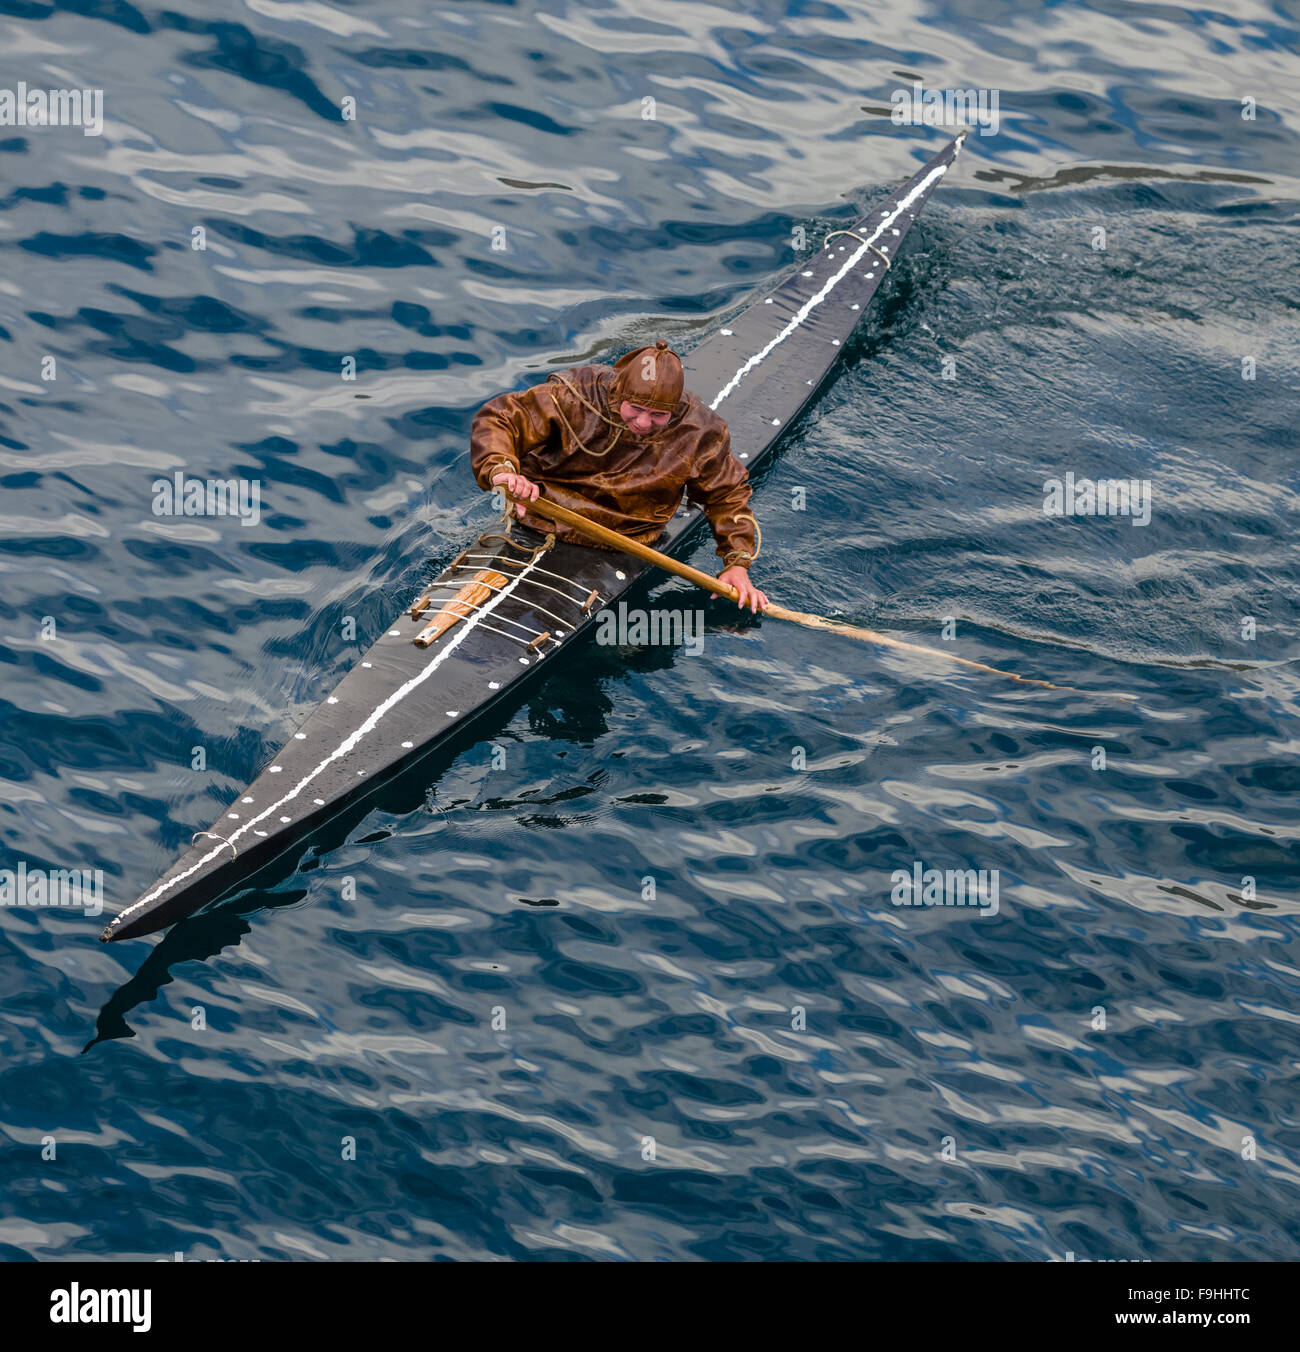 Greenland Kayak Inuit High Resolution Stock Photography and Images - Alamy